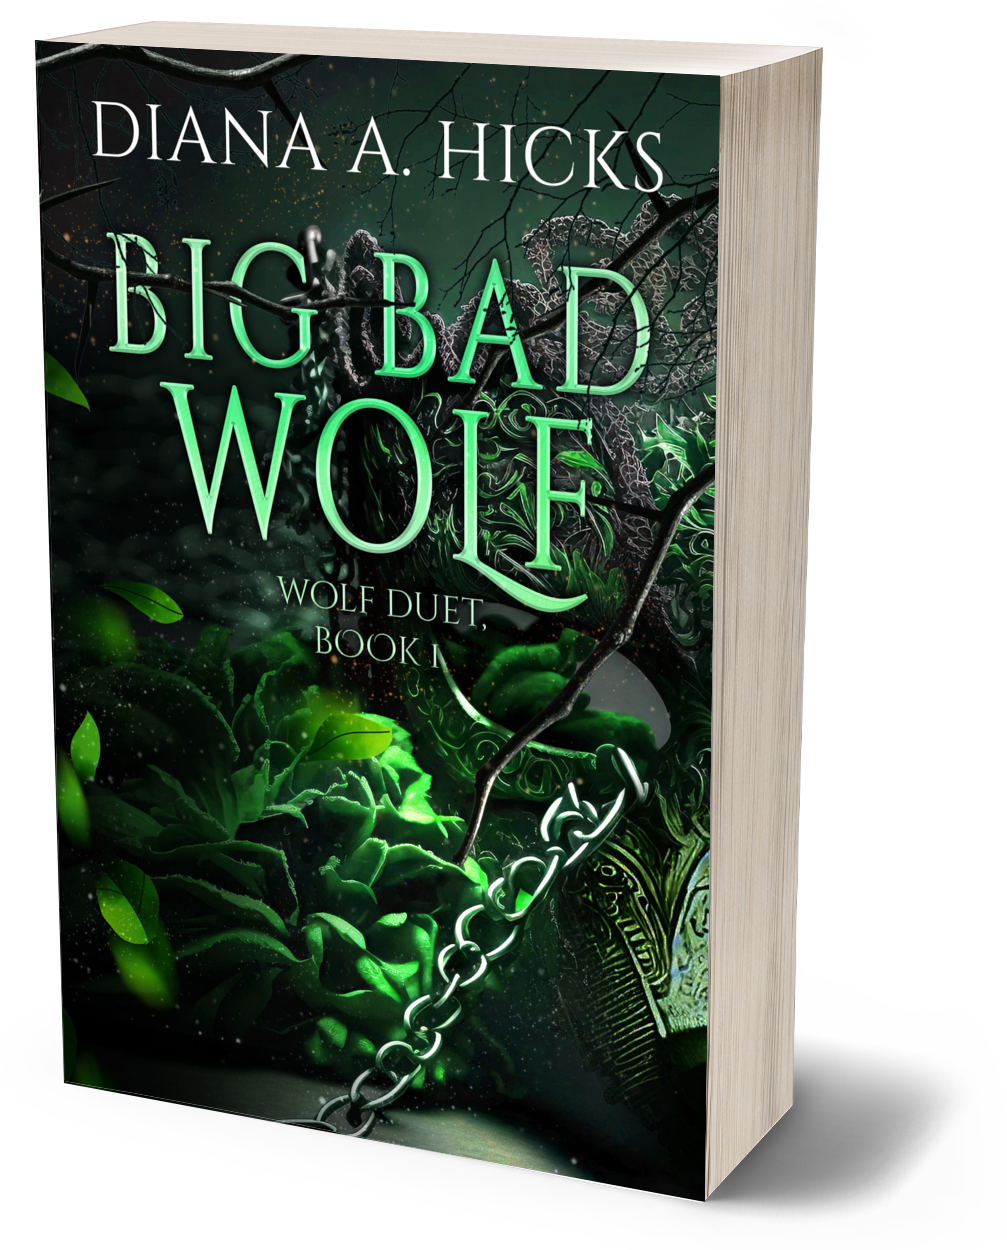 Big Bad Wolf: Special Edition Cover (The Society Book 3)